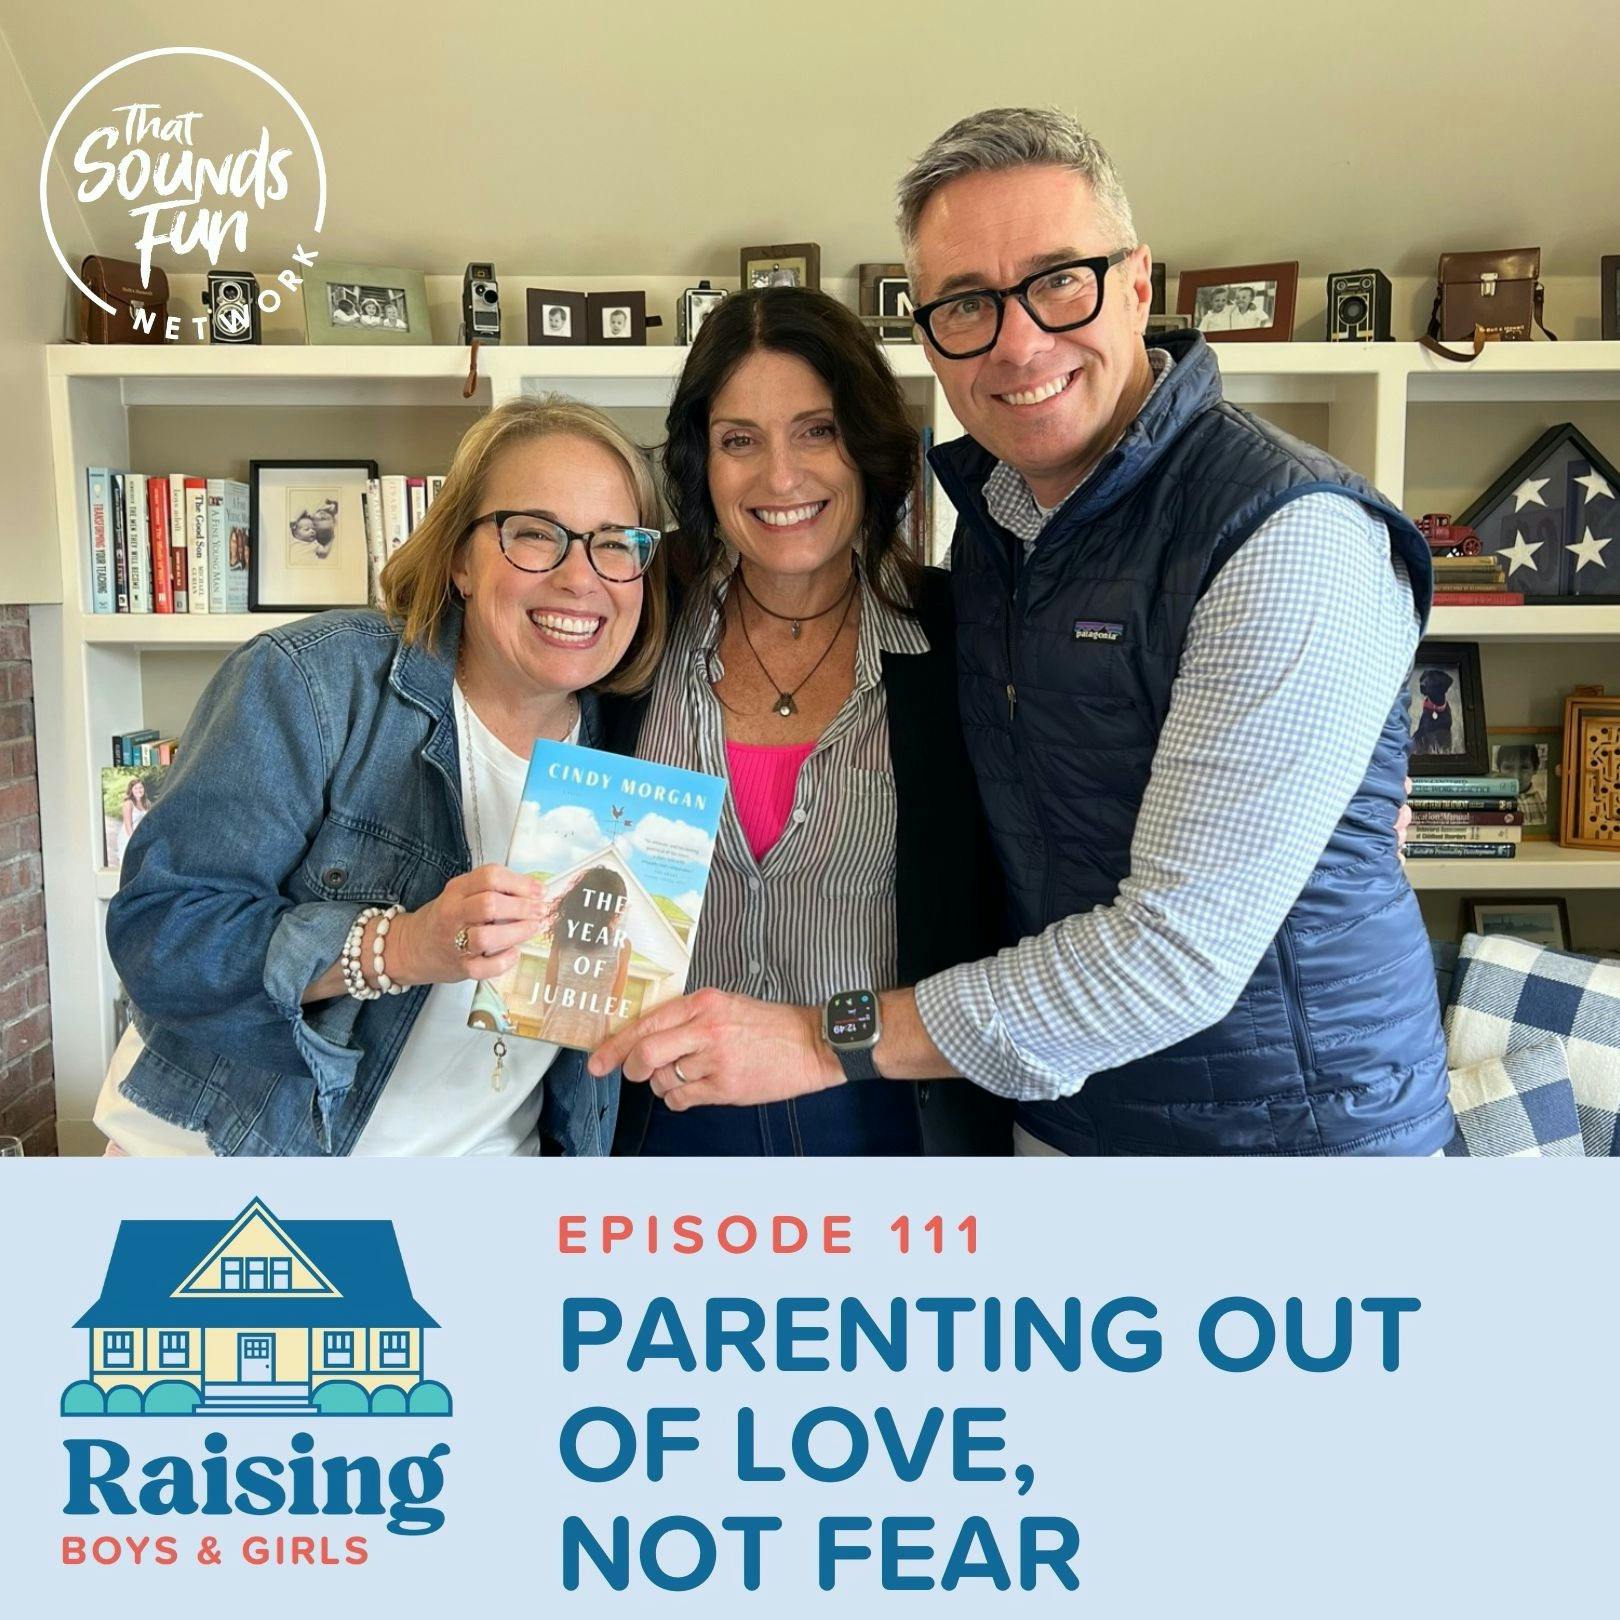 Episode 111: Parenting Out of Love, Not Fear